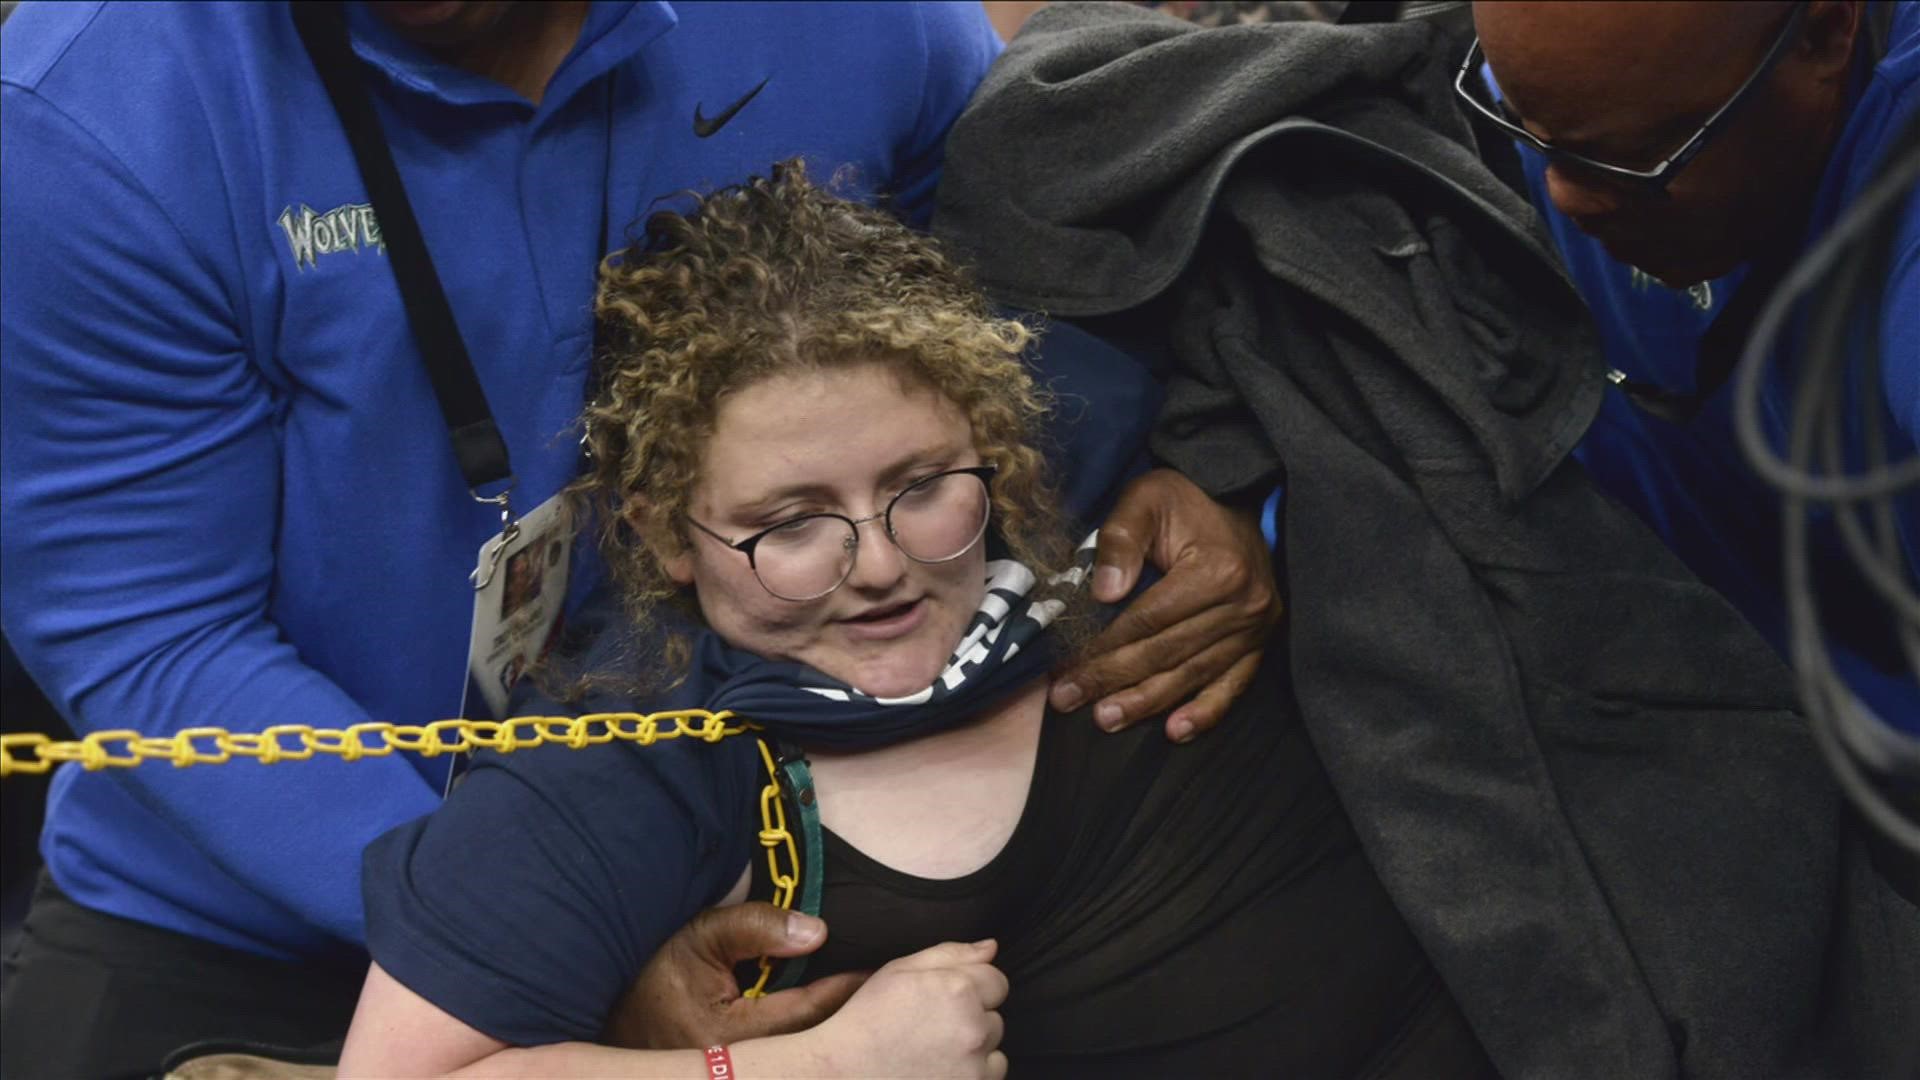 Zoe Rosenberg was arrested Saturday, April 16 after chaining herself to a basketball goal post at the Grizzlies vs. Timberwolves Western Conference playoff game.